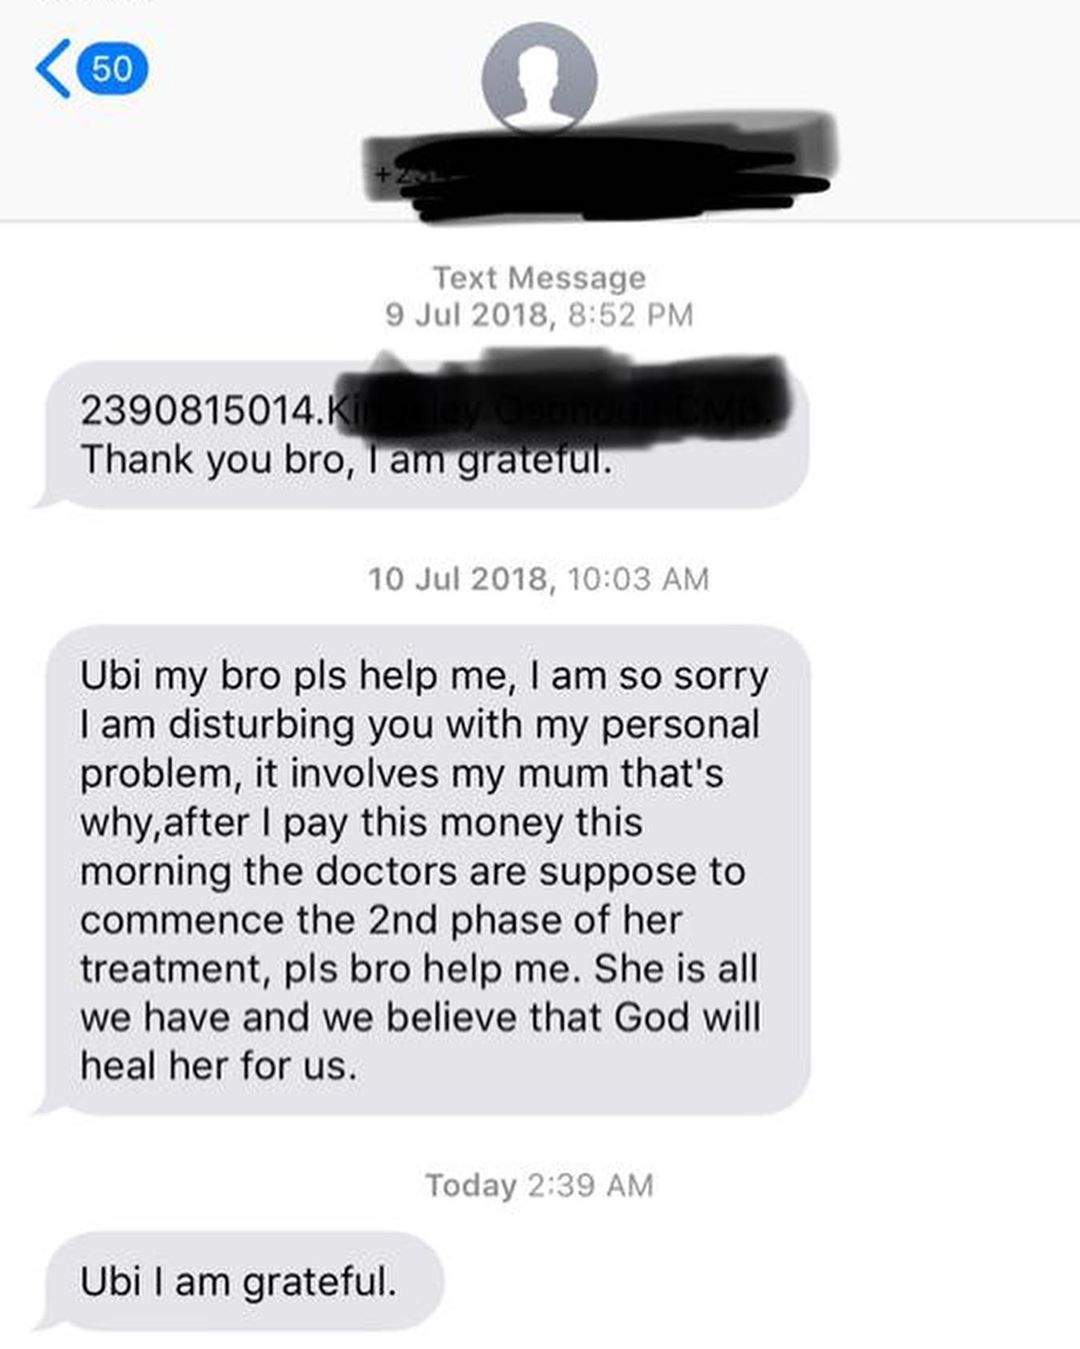 Ubi Franklin shares encounter with someone he helped in 2018